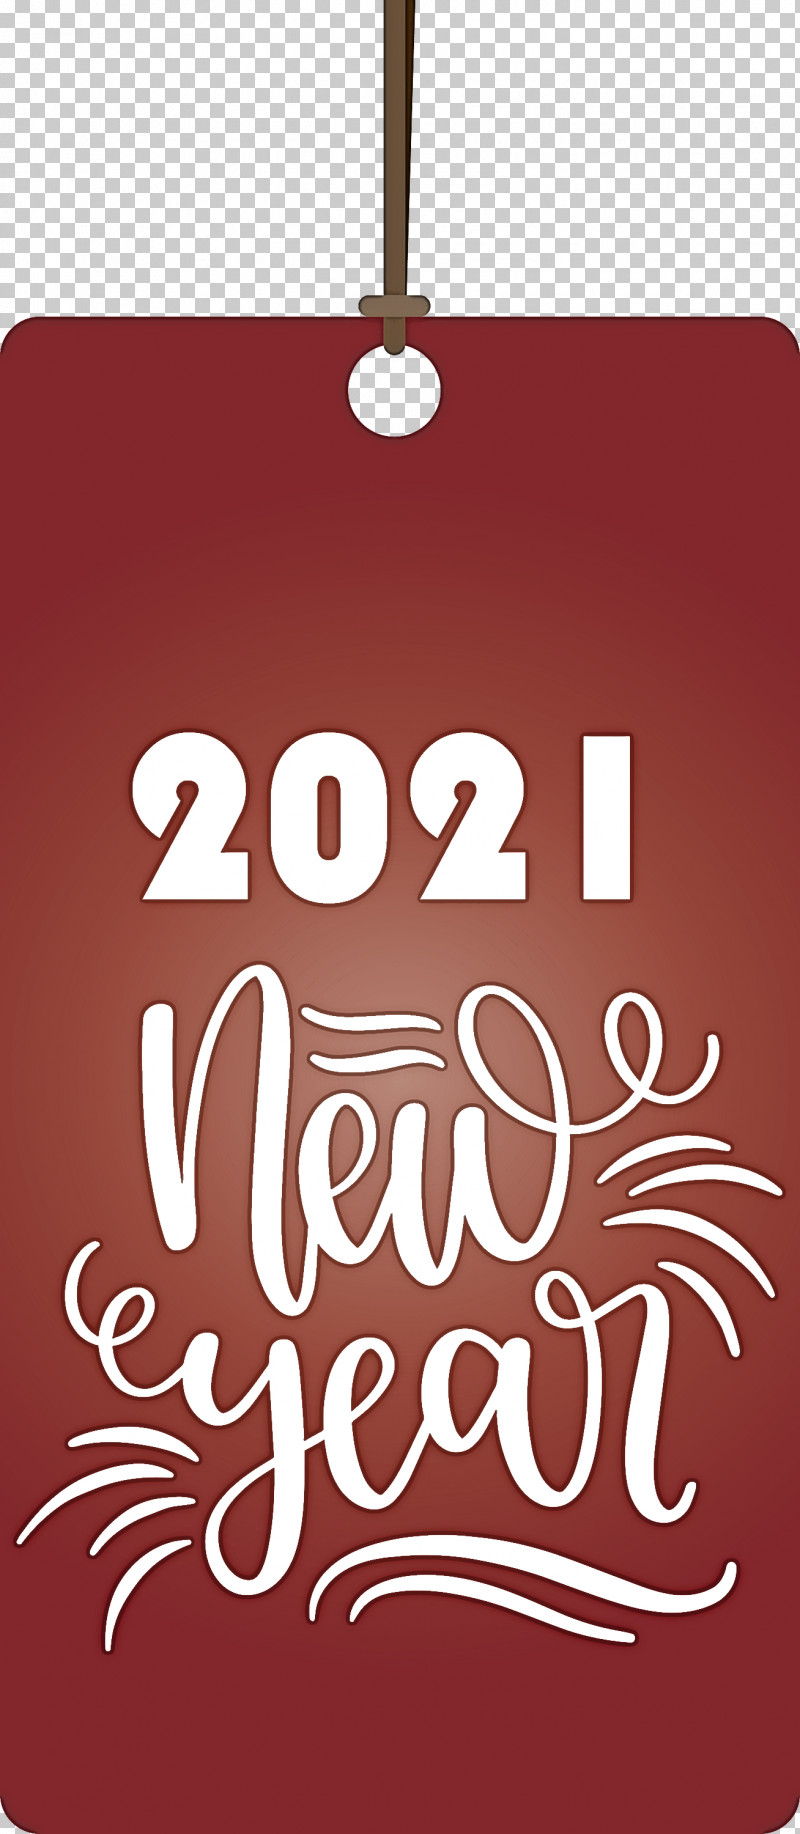 2021 Happy New Year 2021 Happy New Year Tag 2021 New Year PNG, Clipart, 2021 Happy New Year, 2021 Happy New Year Tag, 2021 New Year, Calligraphy, Christmas Day Free PNG Download